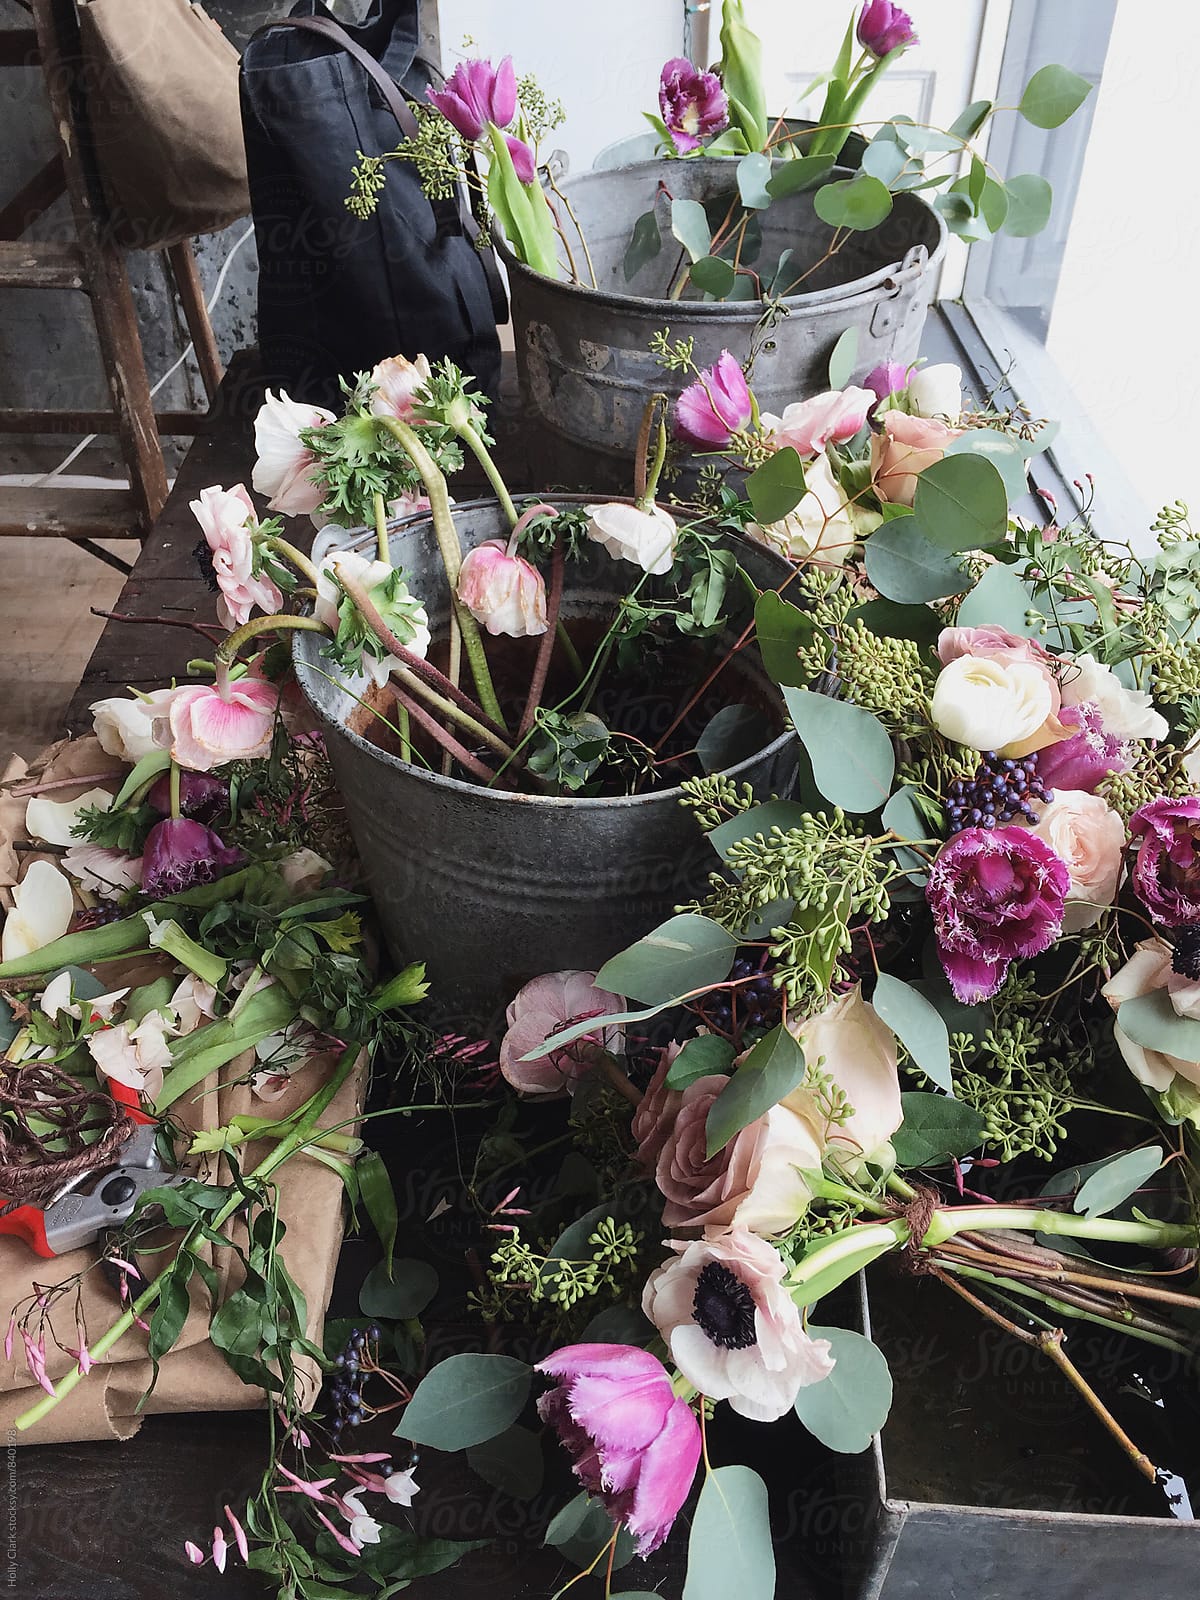 Galvanized steel buckets of flowers rest on a table for arrangements